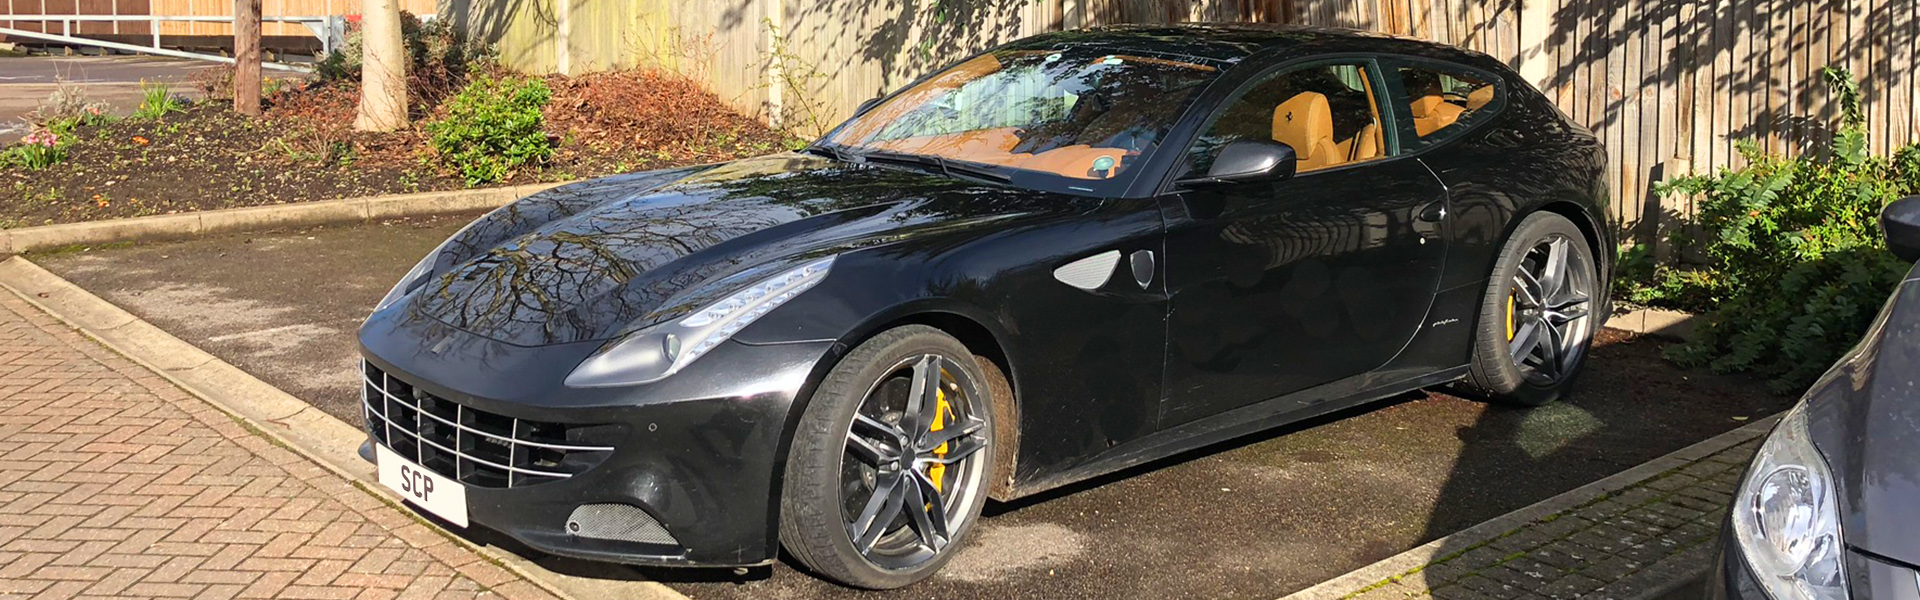 Why this Ferrari FF with Novitec sports exhaust is going to blow your mind?